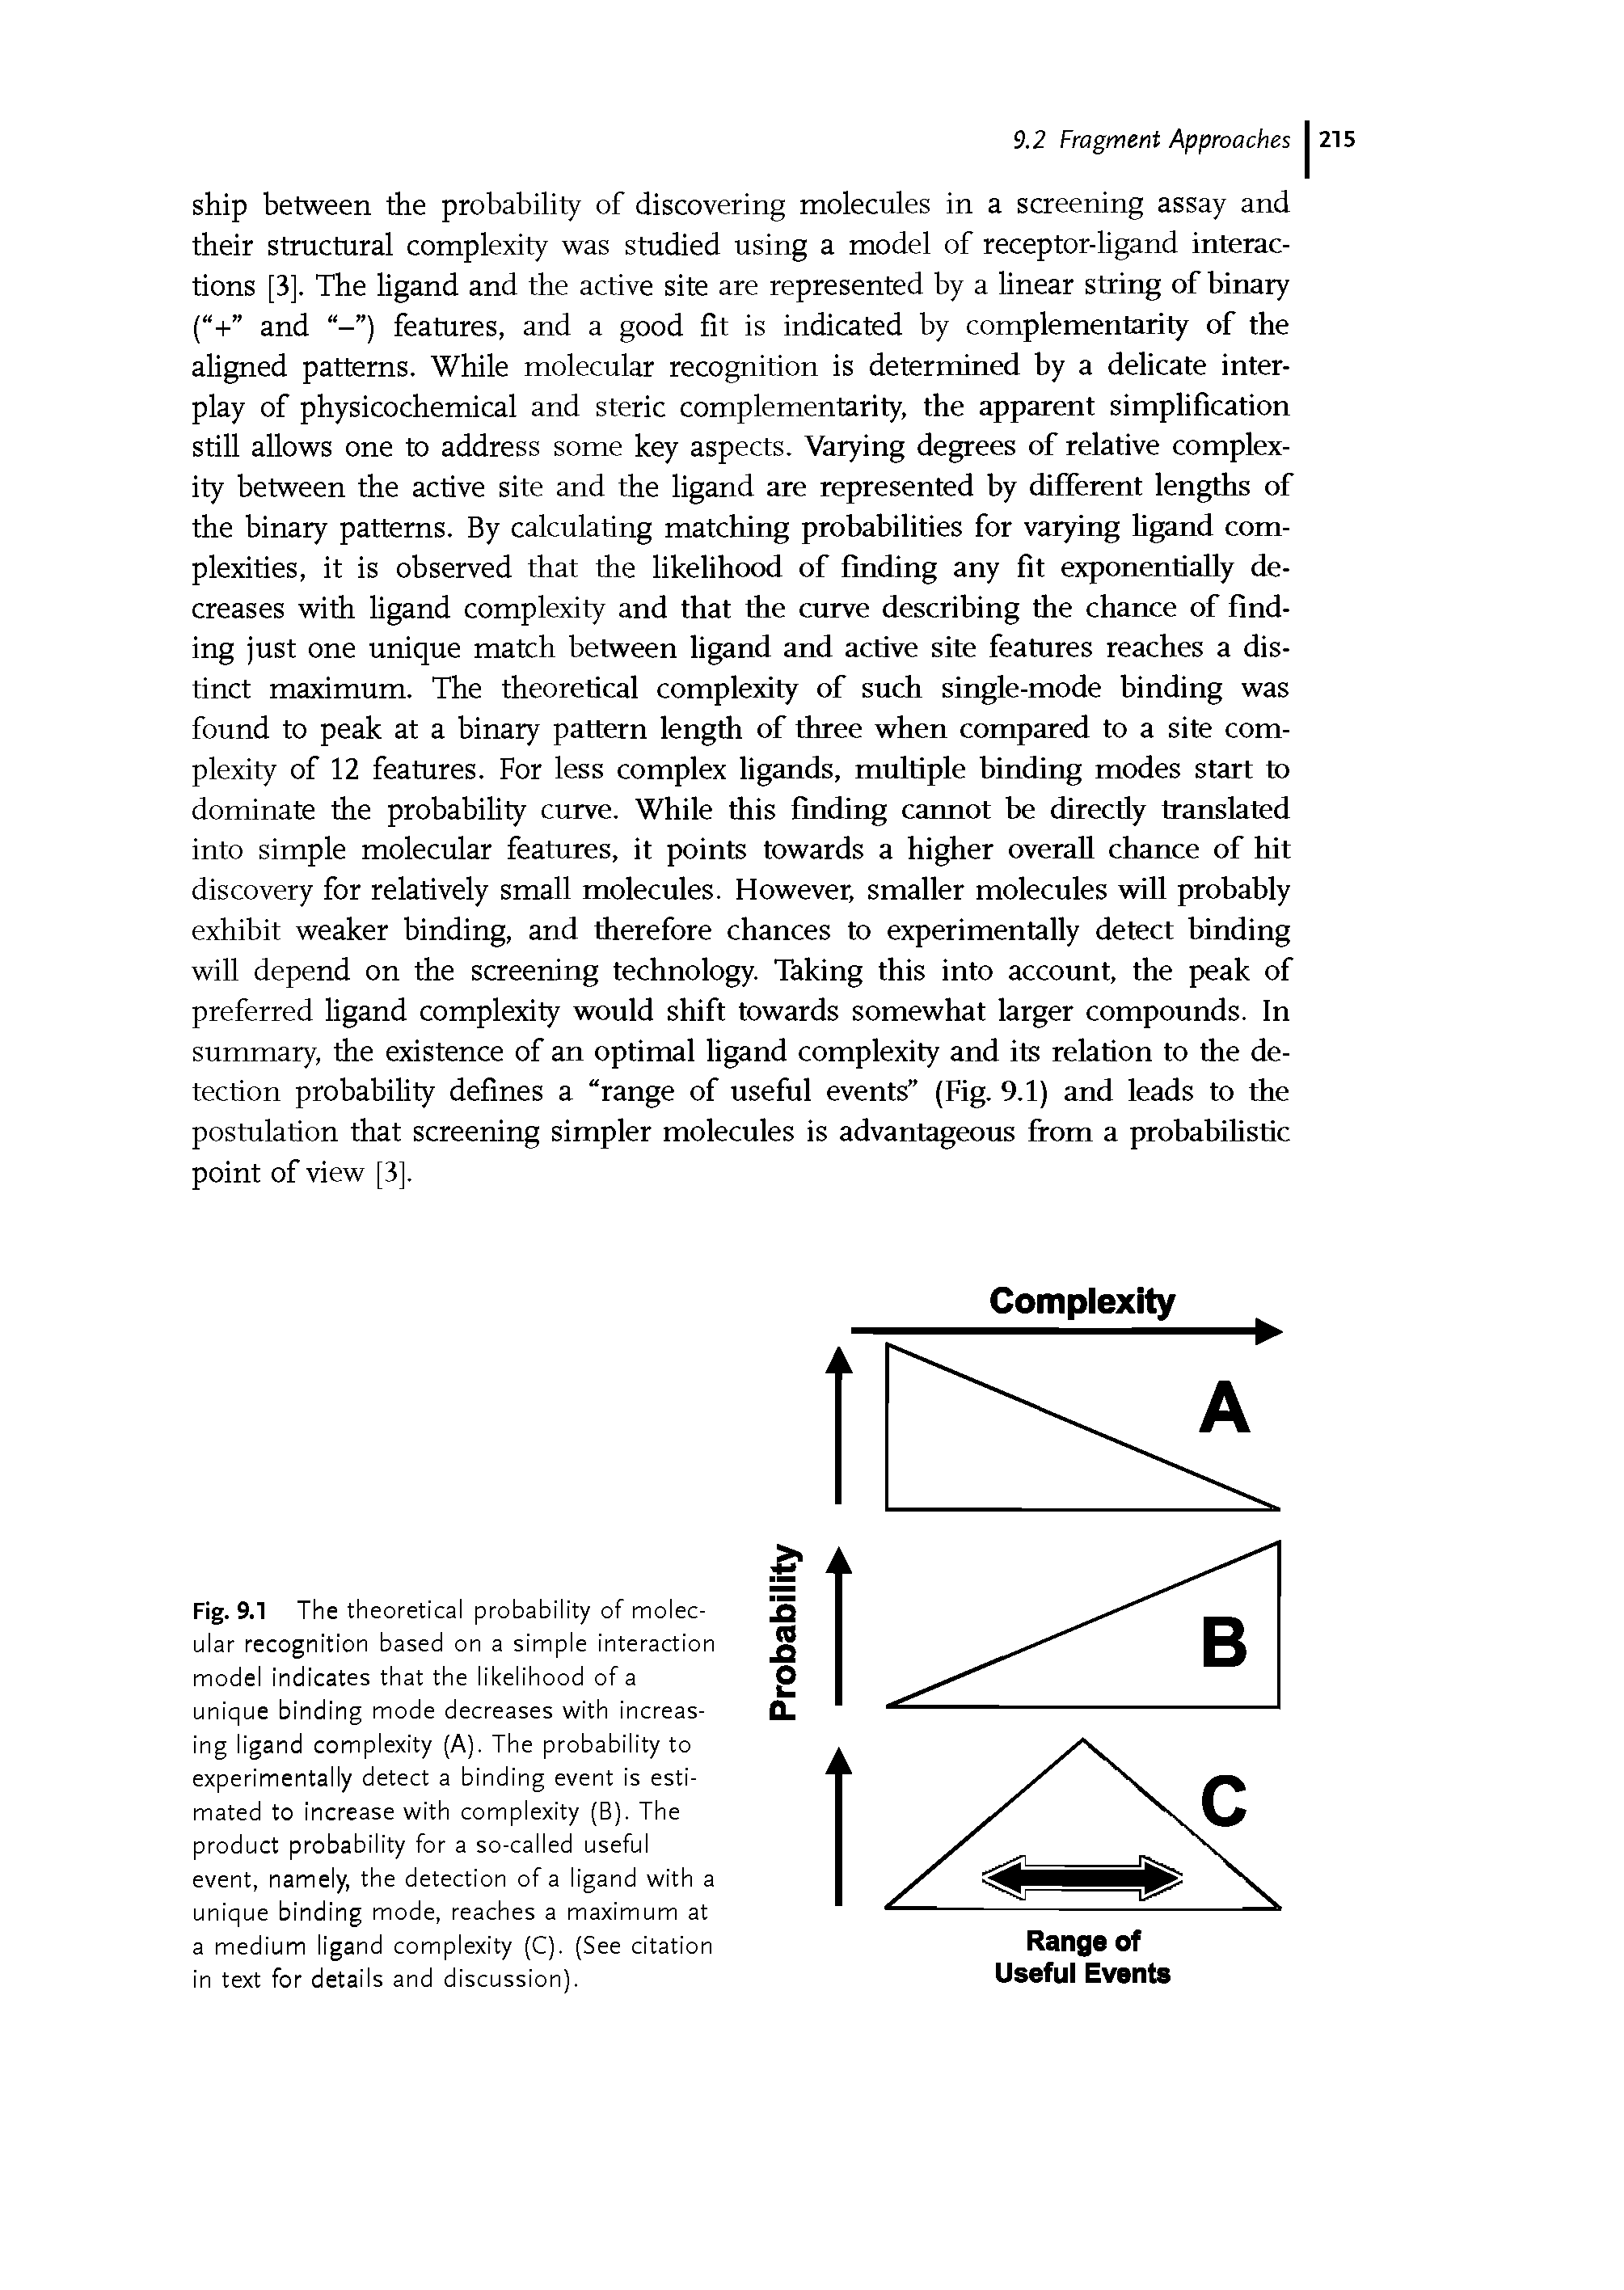 Fig. 9.1 The theoretical probability of molecular recognition based on a simple interaction model indicates that the likelihood of a unique binding mode decreases with increasing ligand complexity (A). The probability to experimentally detect a binding event is estimated to increase with complexity (B). The product probability for a so-called useful event, namely, the detection of a ligand with a unique binding mode, reaches a maximum at a medium ligand complexity (C). (See citation in text for details and discussion).